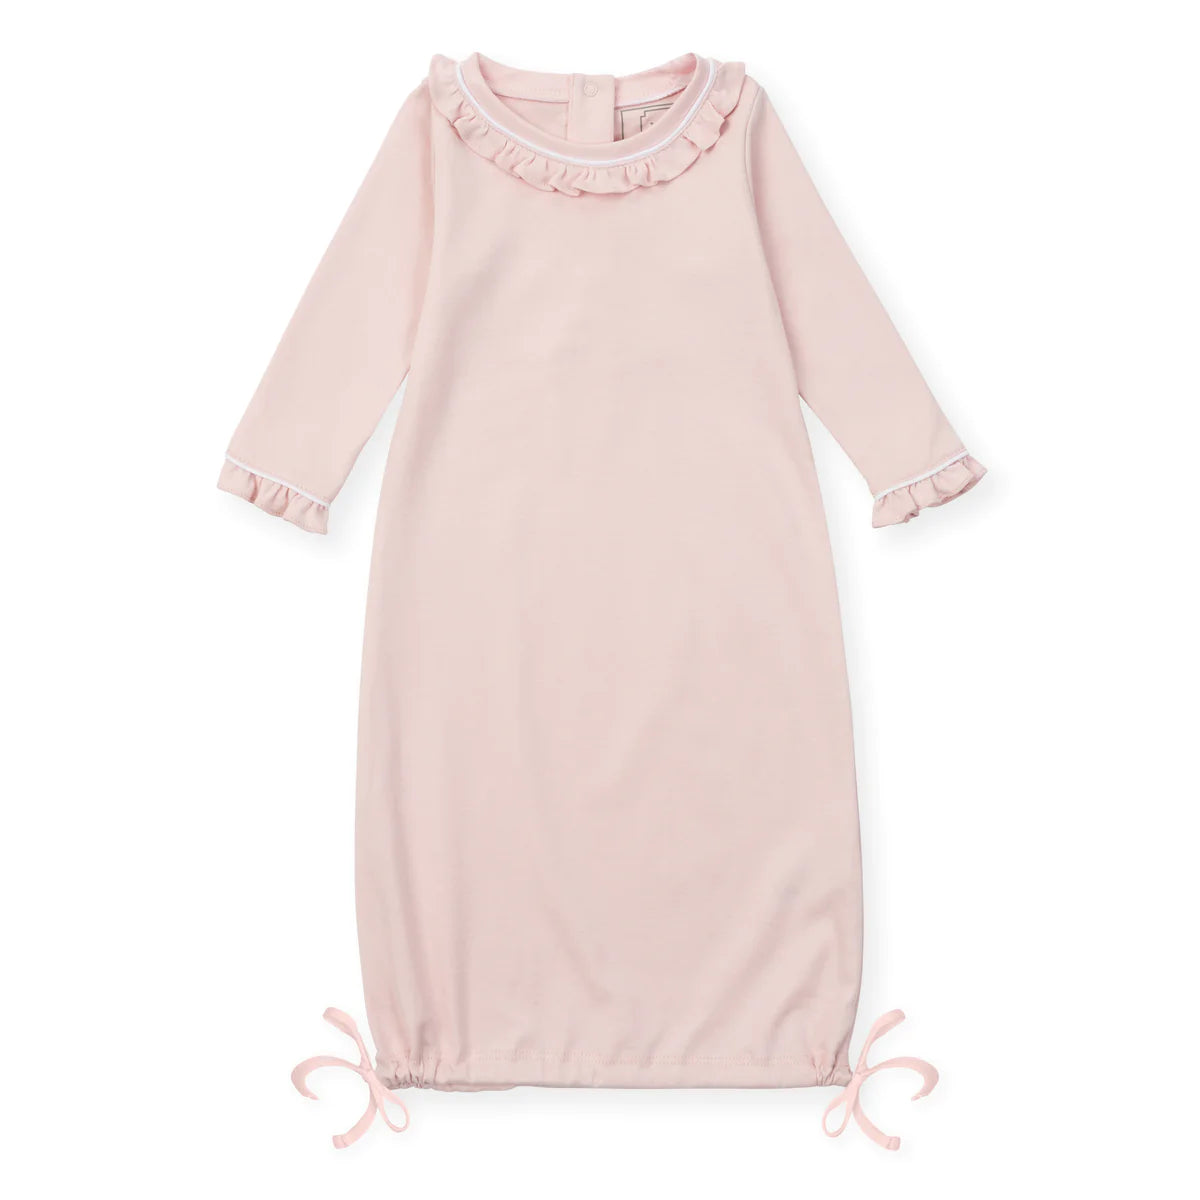 GEORGIA PIMA COTTON DAYGOWN FOR GIRLS - LIGHT PINK WITH WHITE PIPING